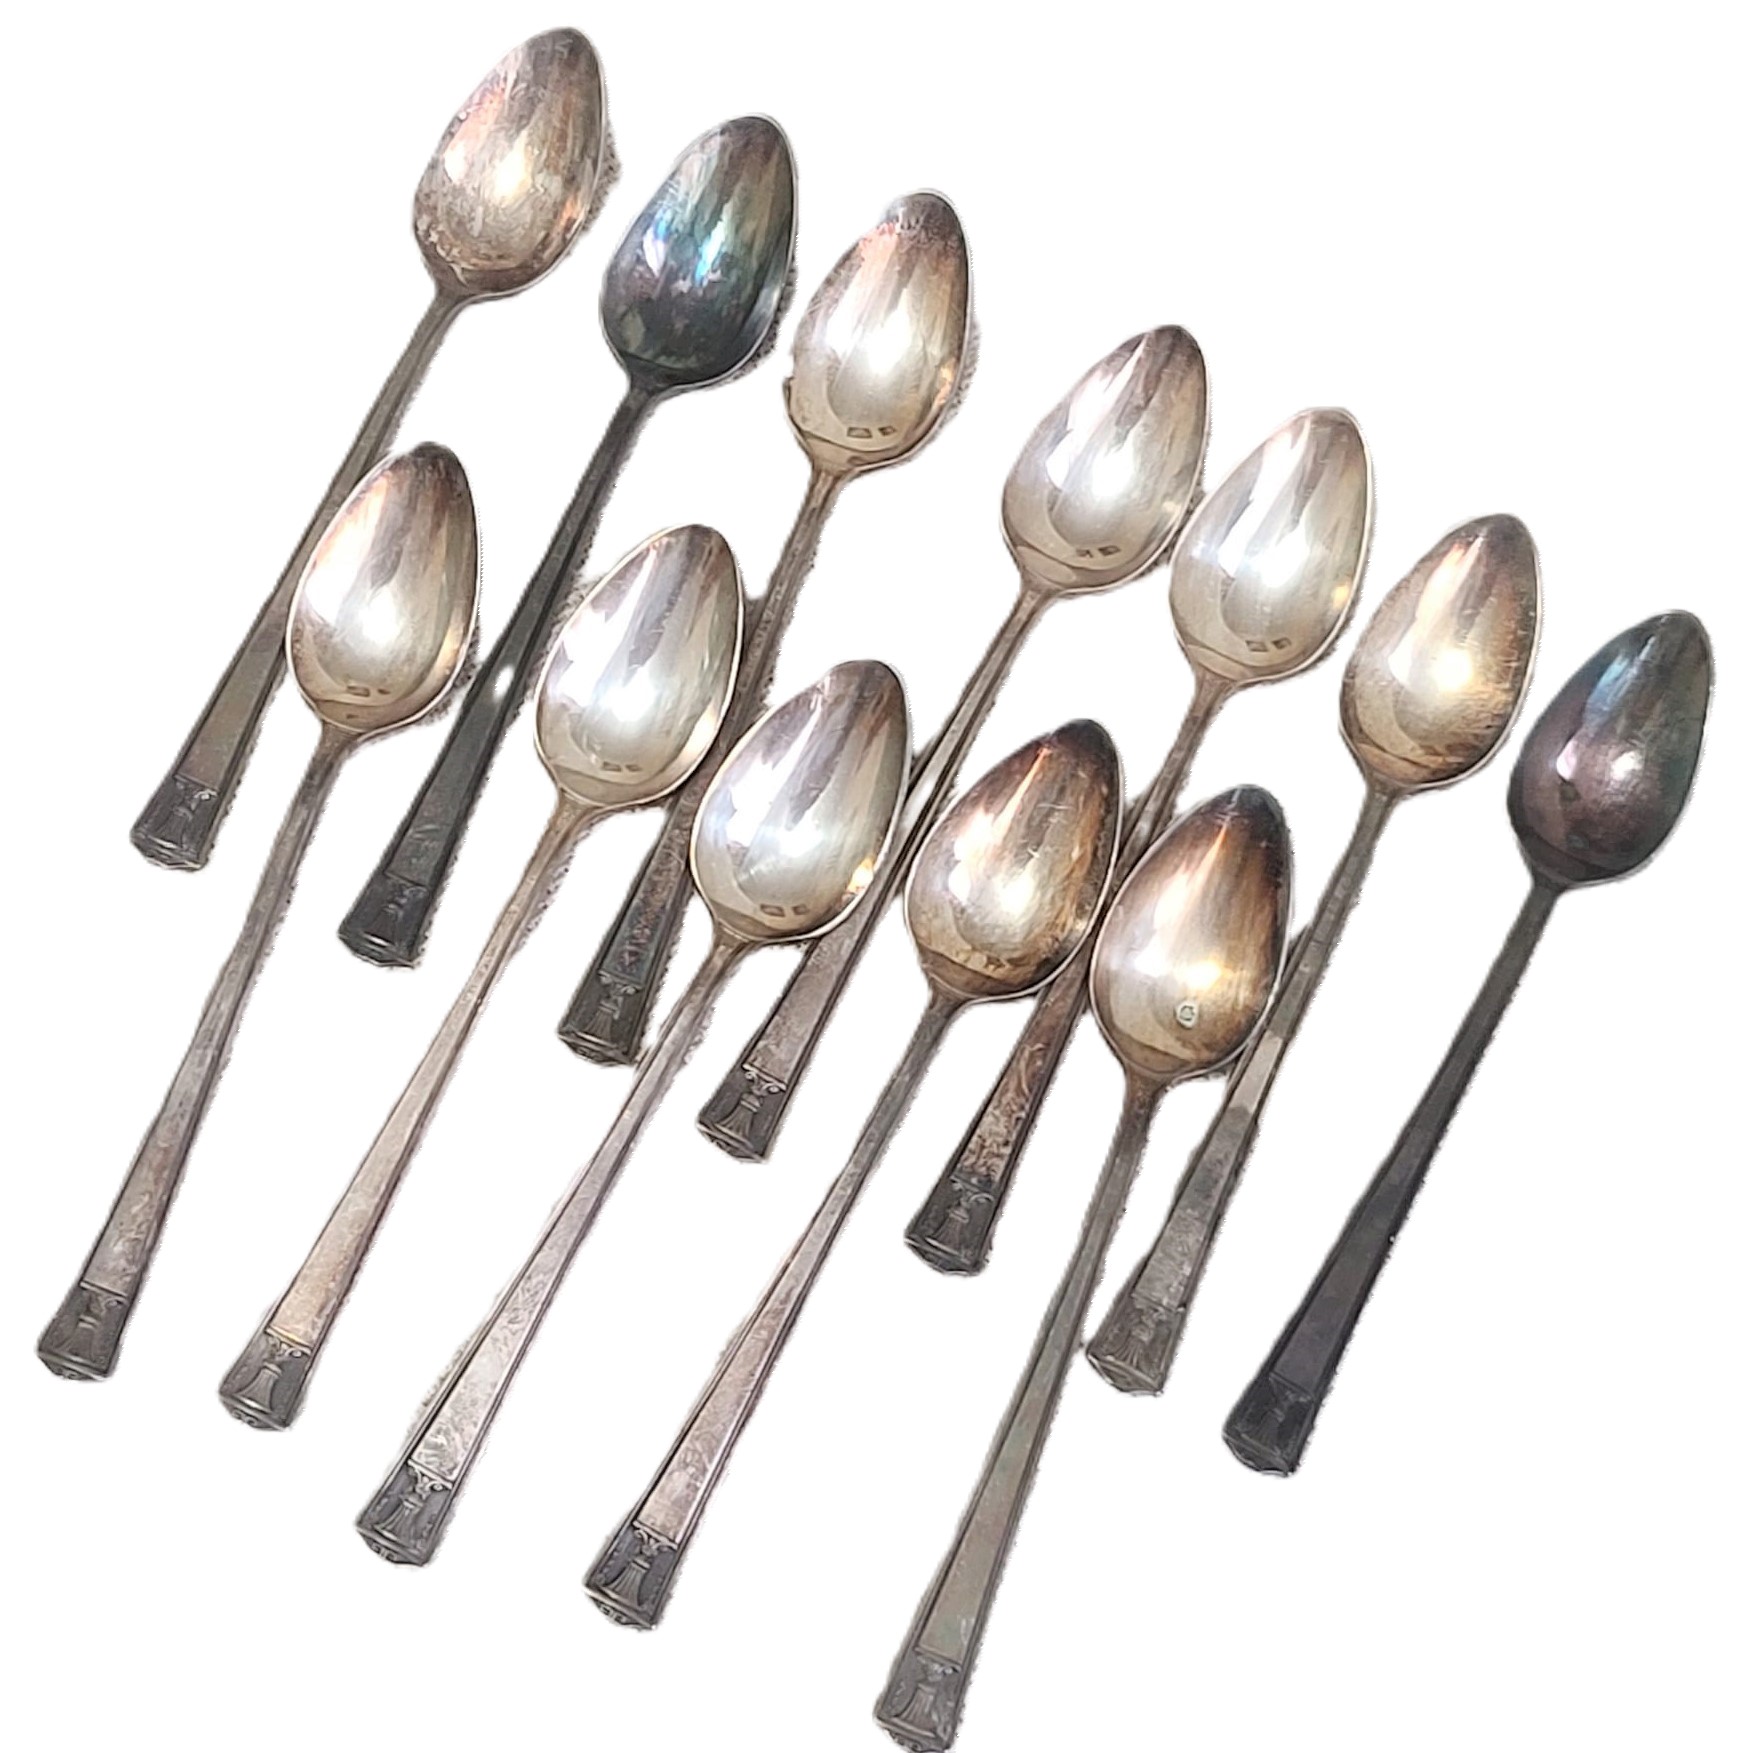 Vintage Silve Plated Tea Spoons Set of 12 Liberty Bell design